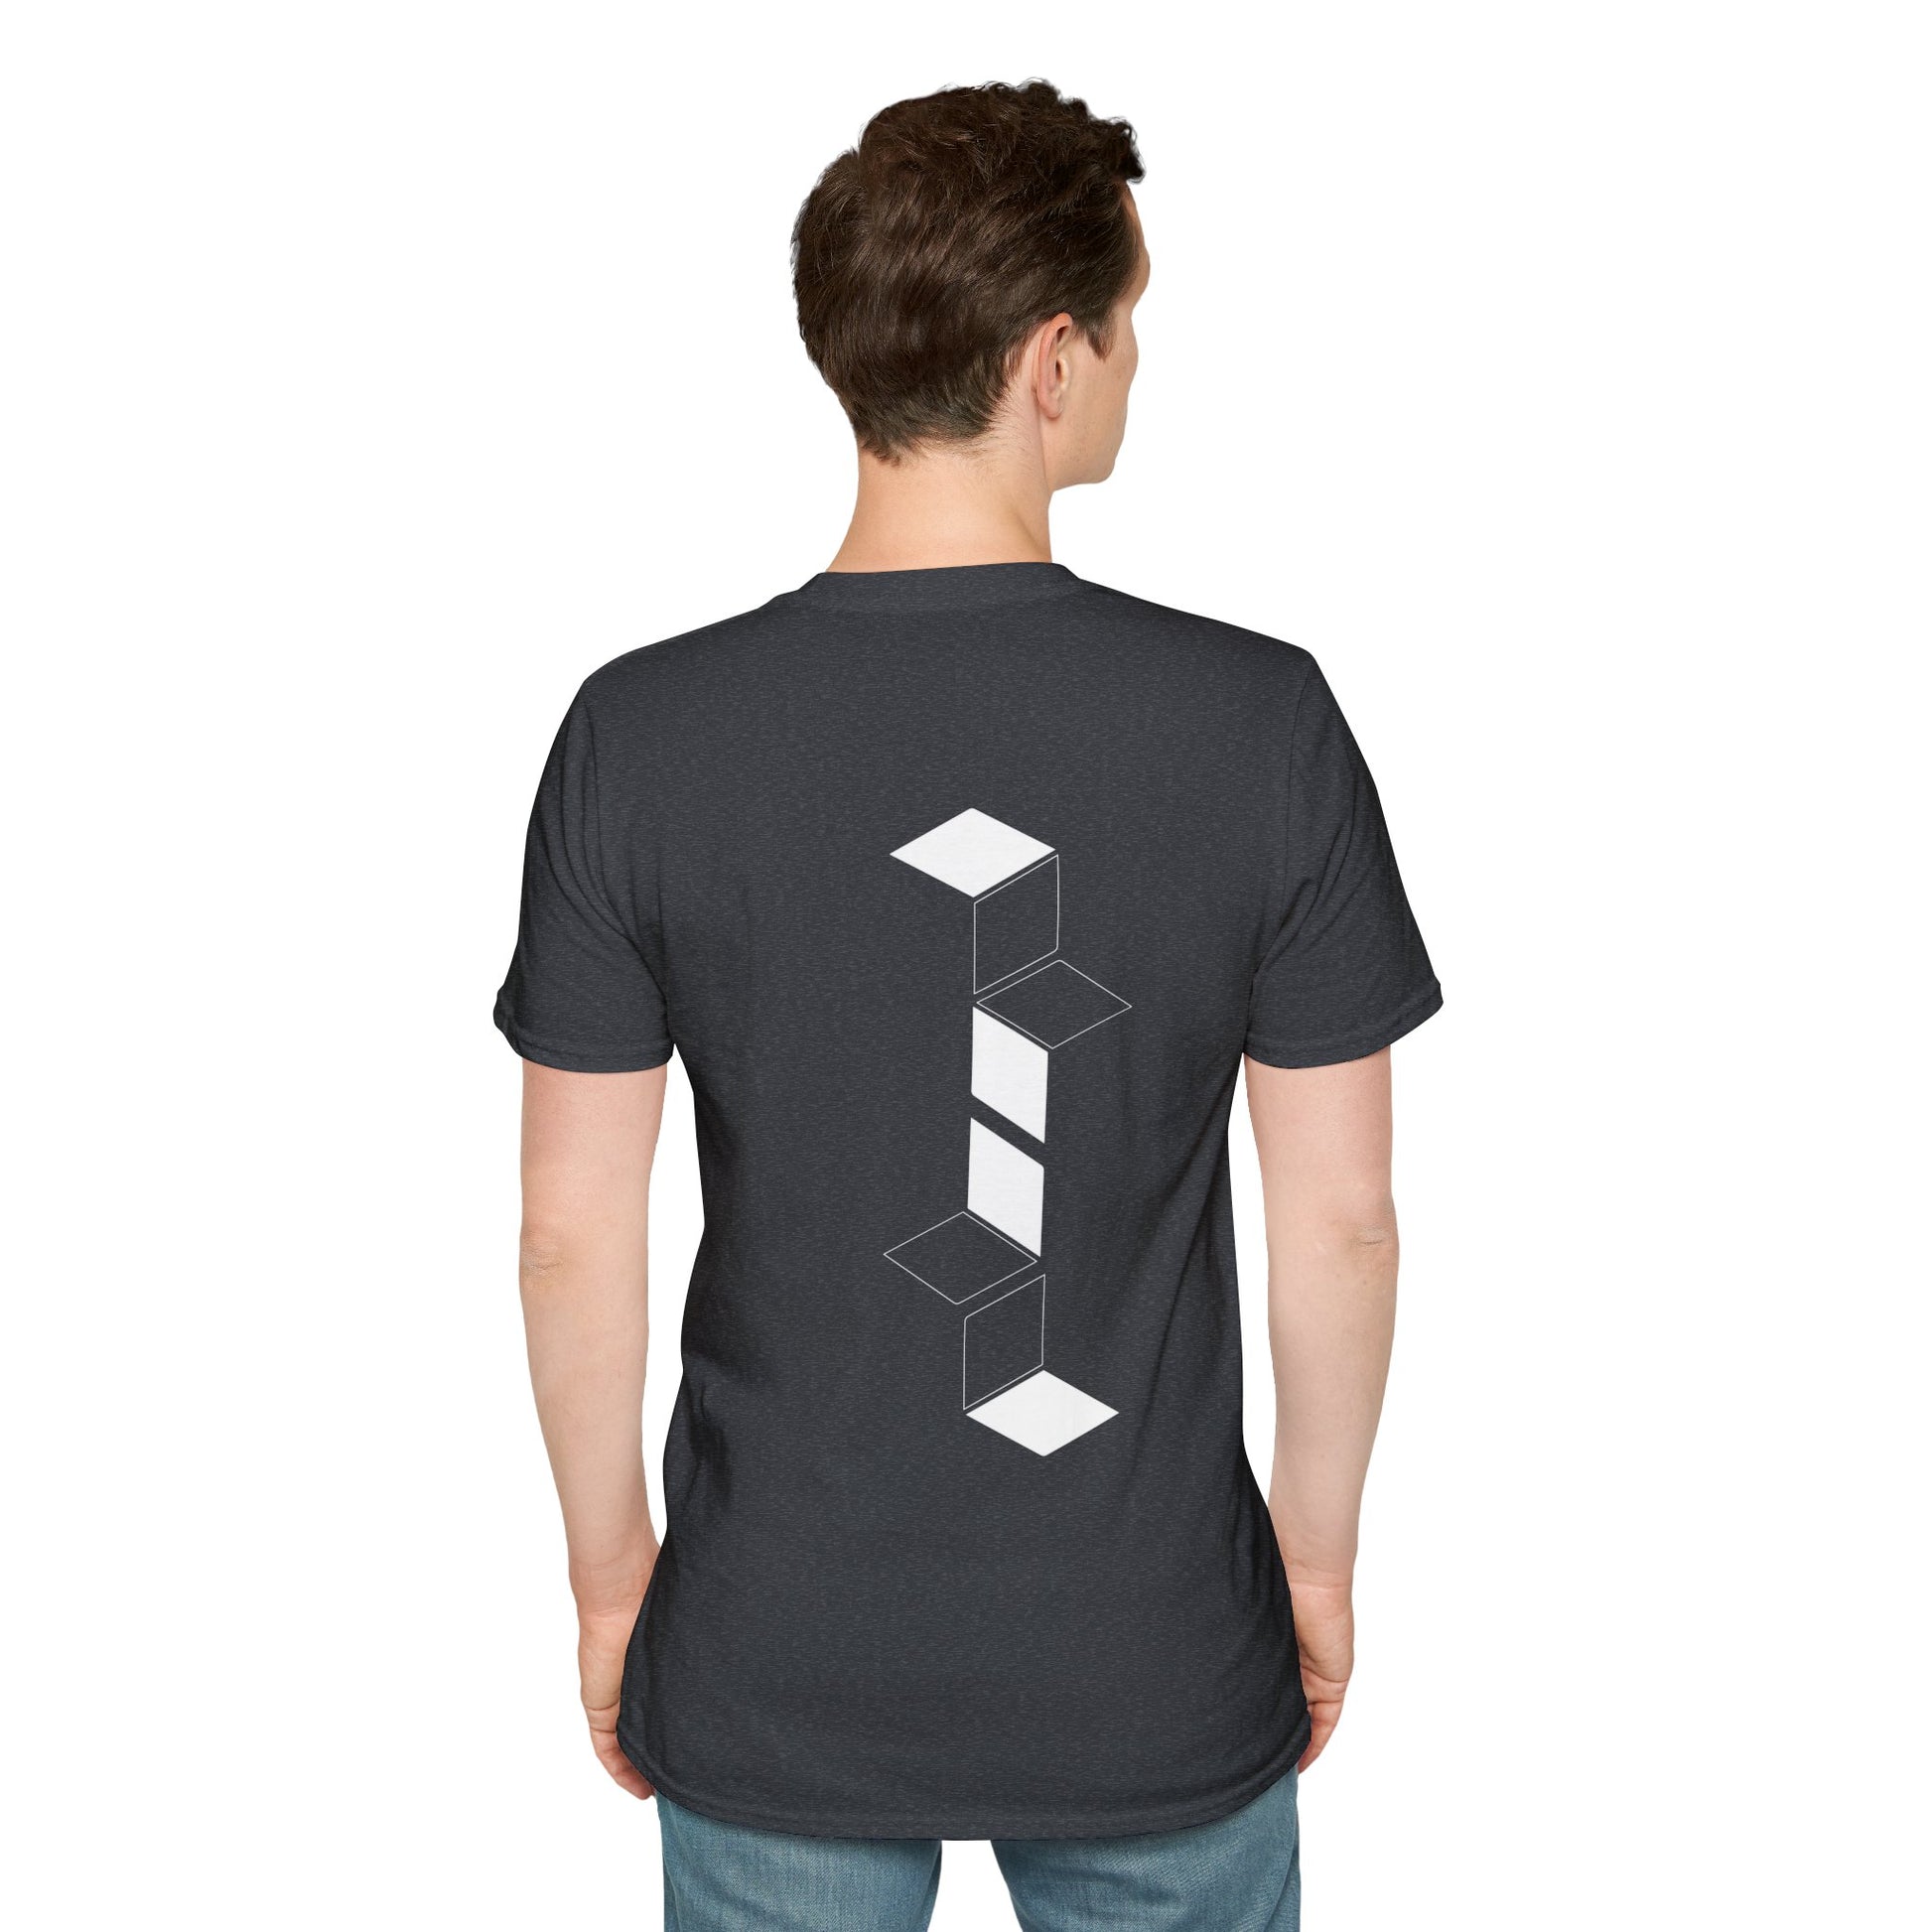 Heather Grey T-shirt with white geometric cube pattern creating a 3D optical illusion